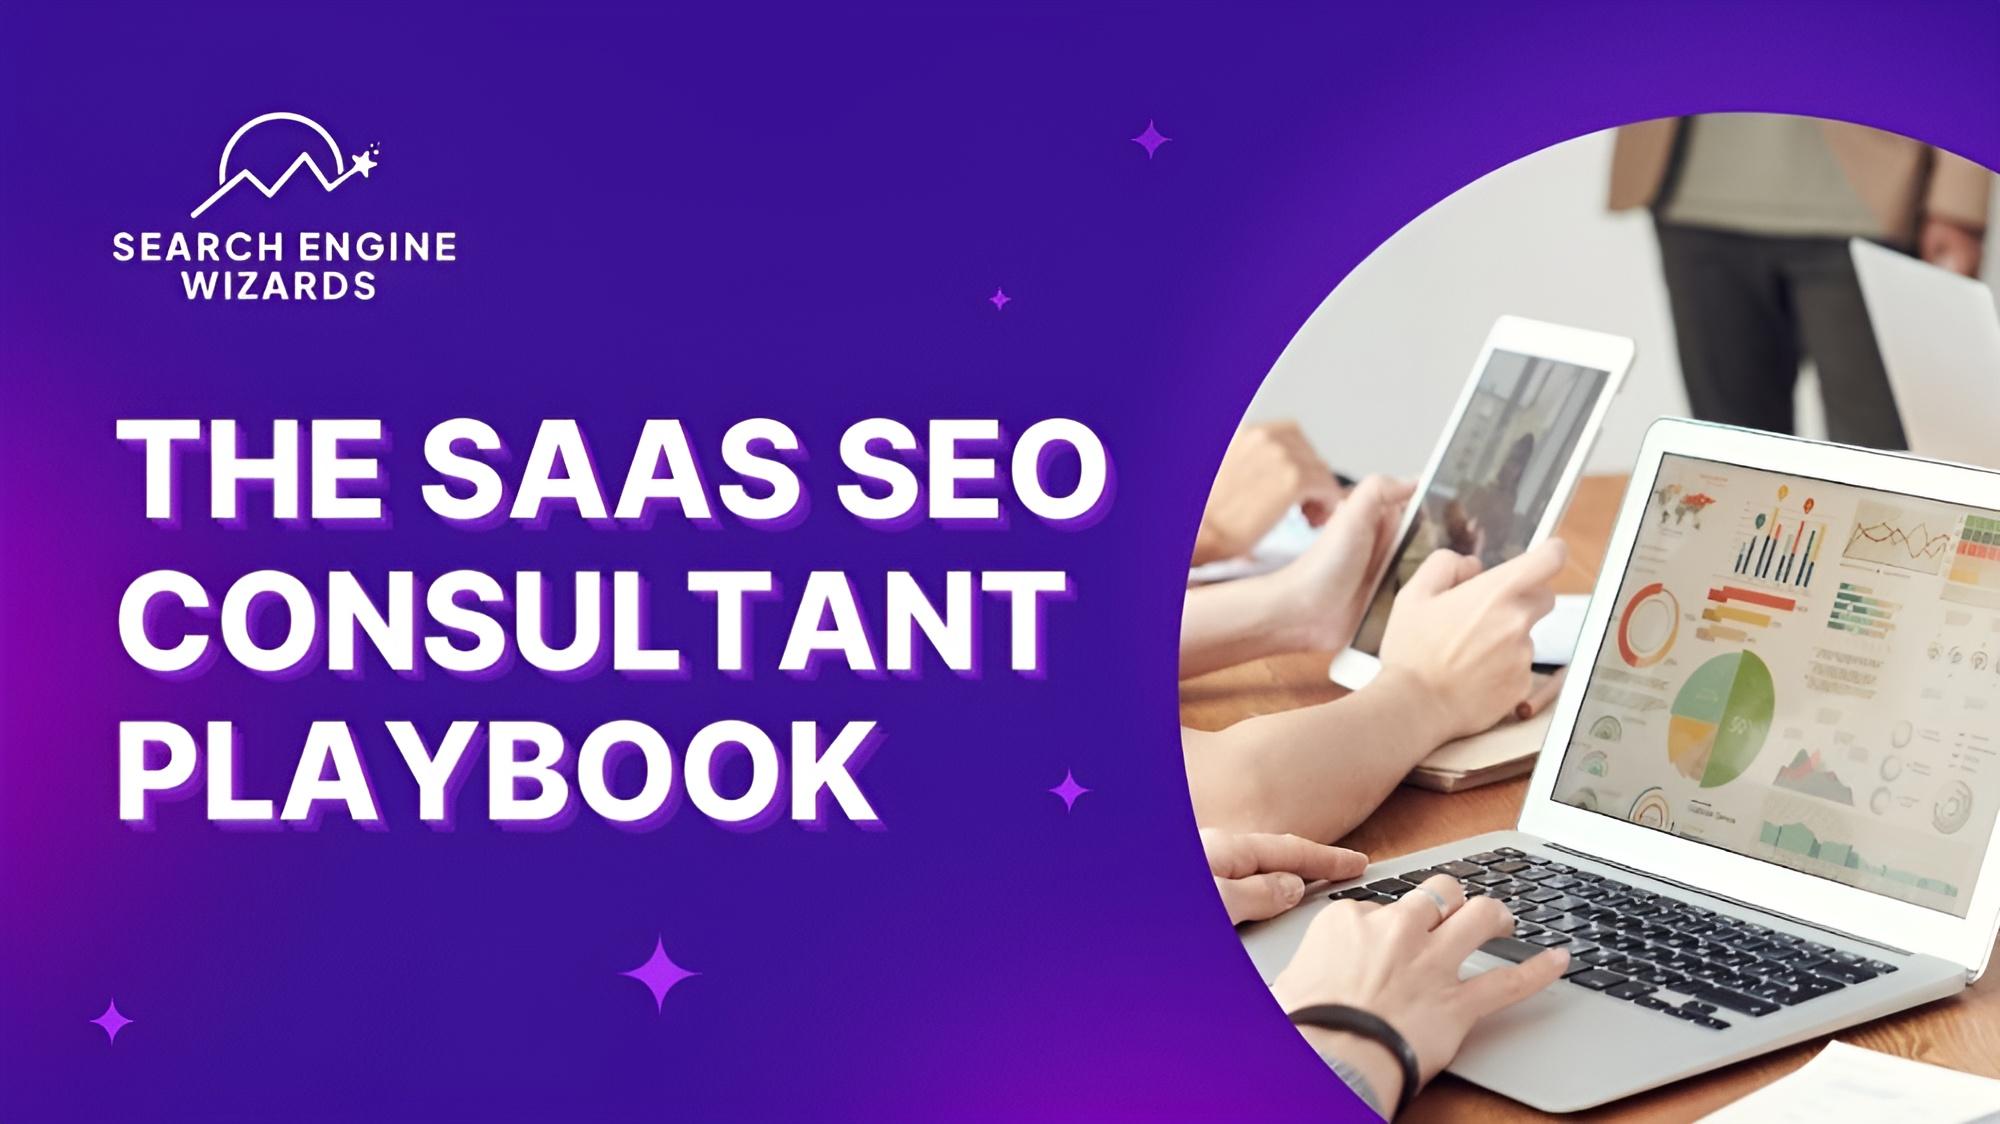 SaaS SEO Consultant: Your New Secret Weapon for Online Success